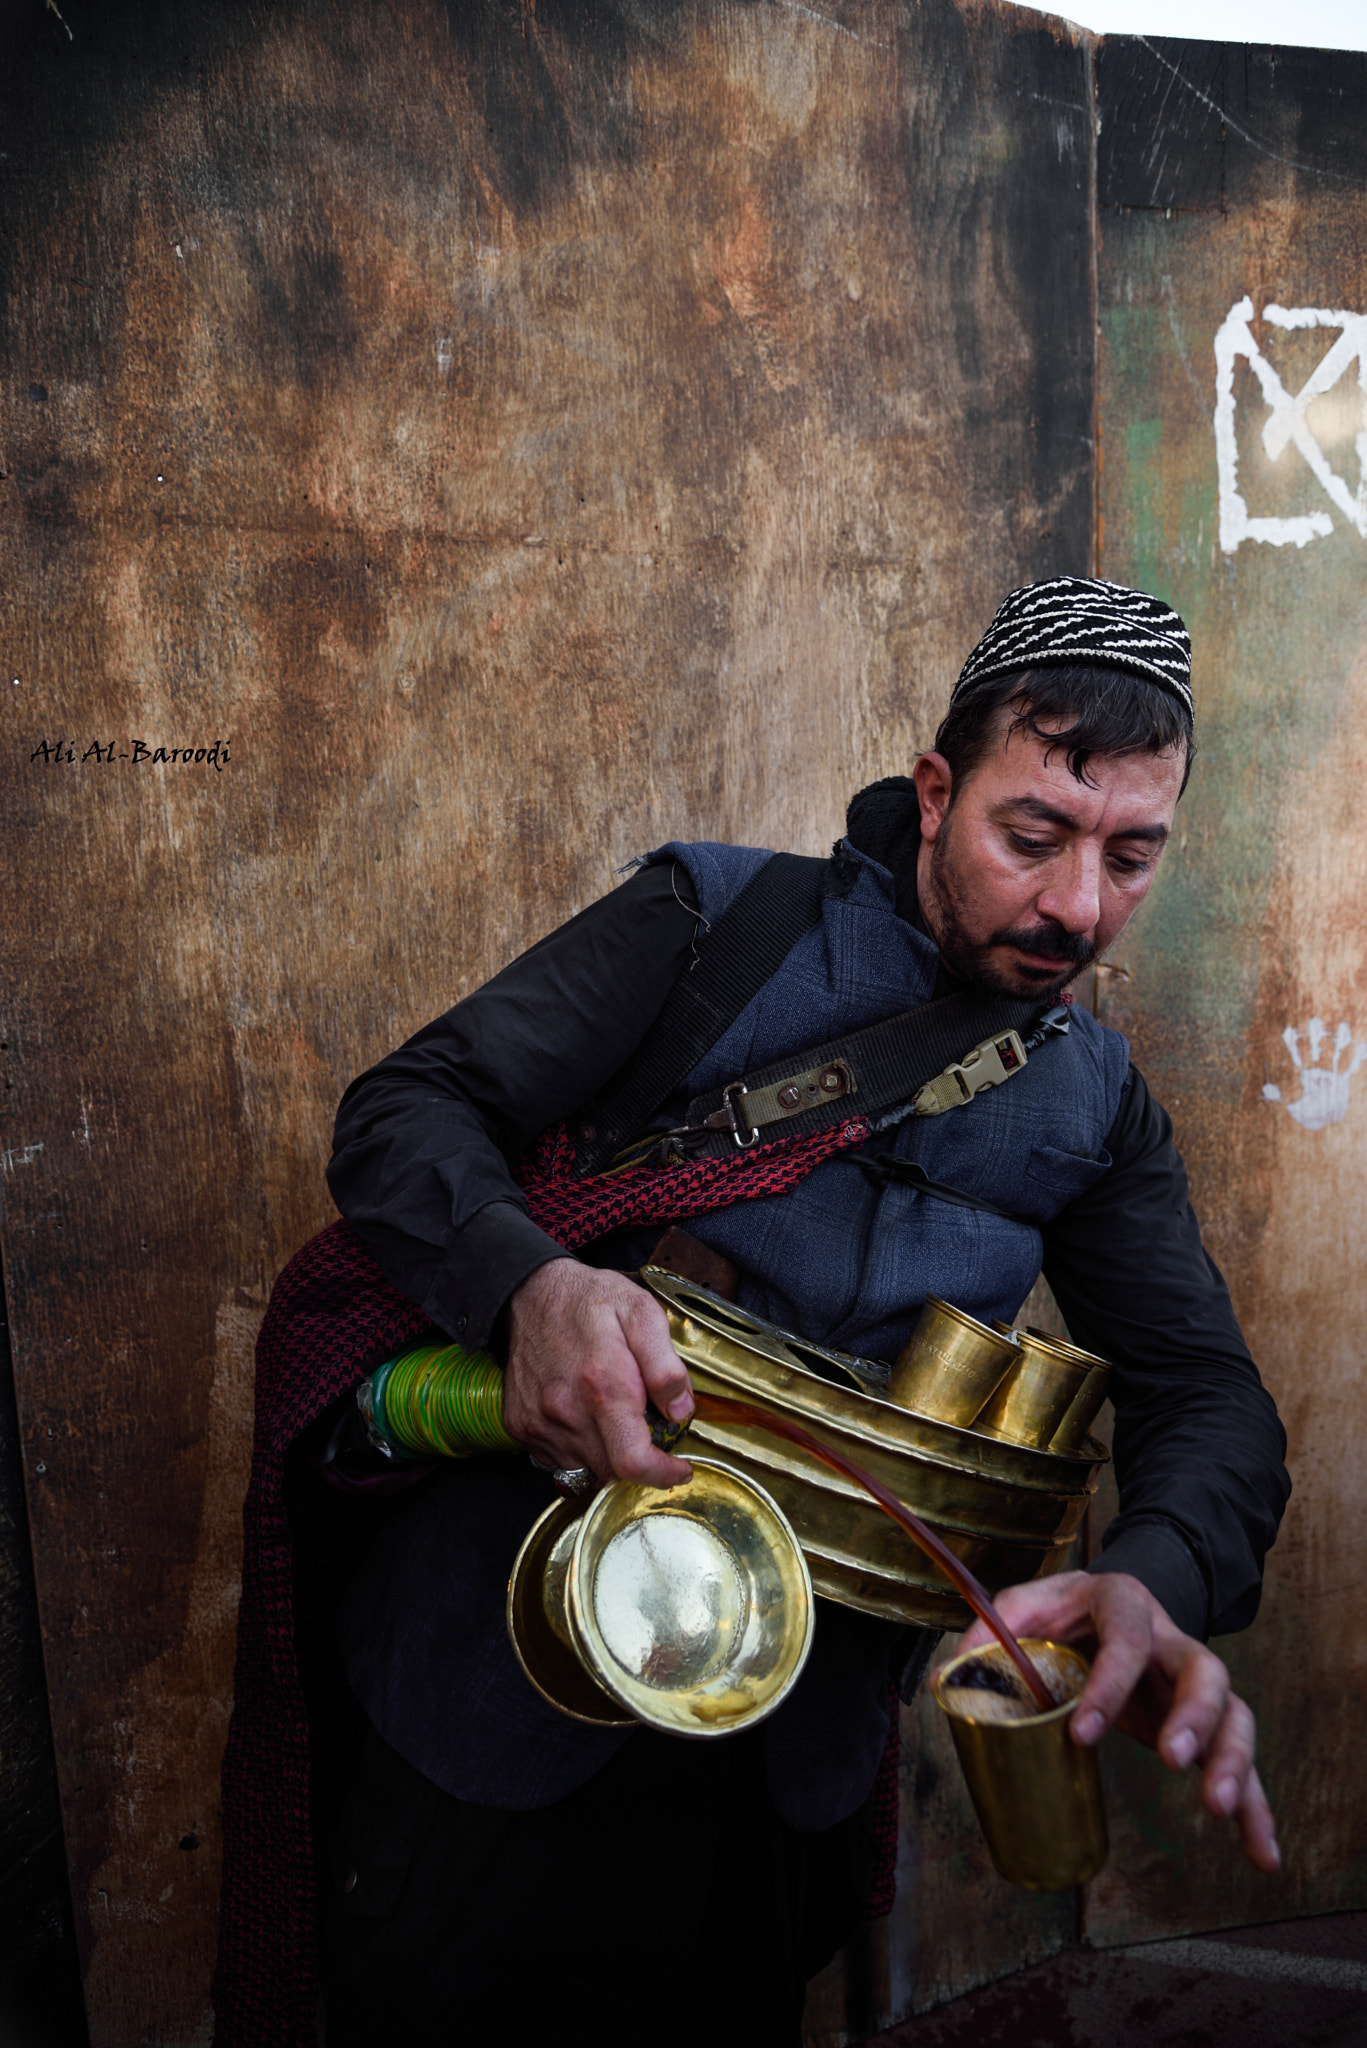 A craftsman from Mosul